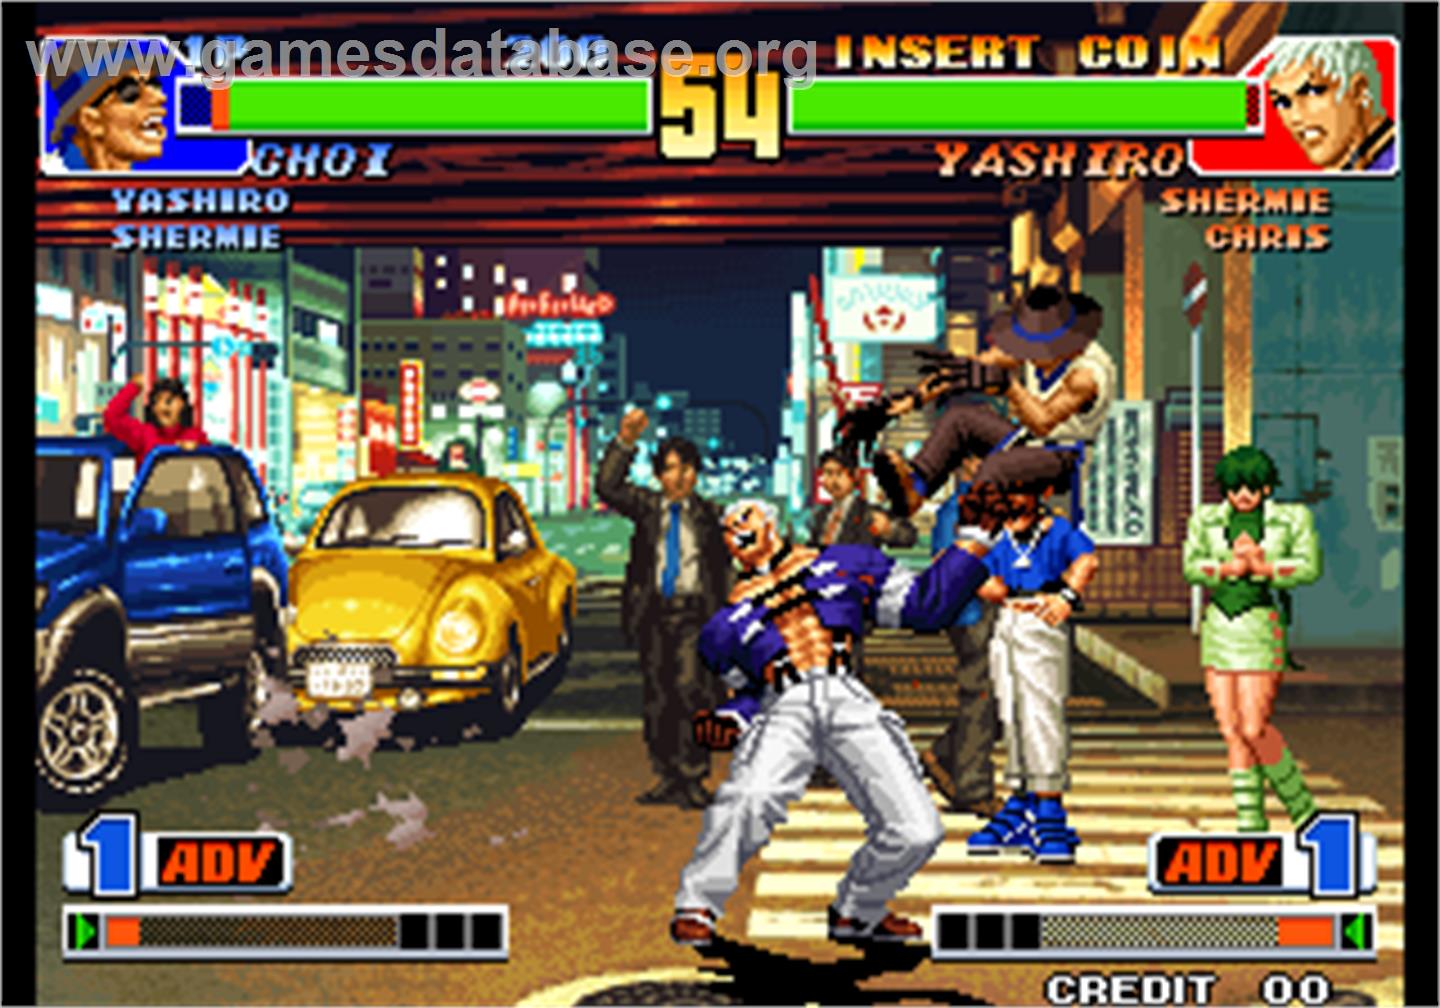 The King of Fighters '98 - The Slugfest / King of Fighters '98 - dream match never ends - Arcade - Artwork - In Game